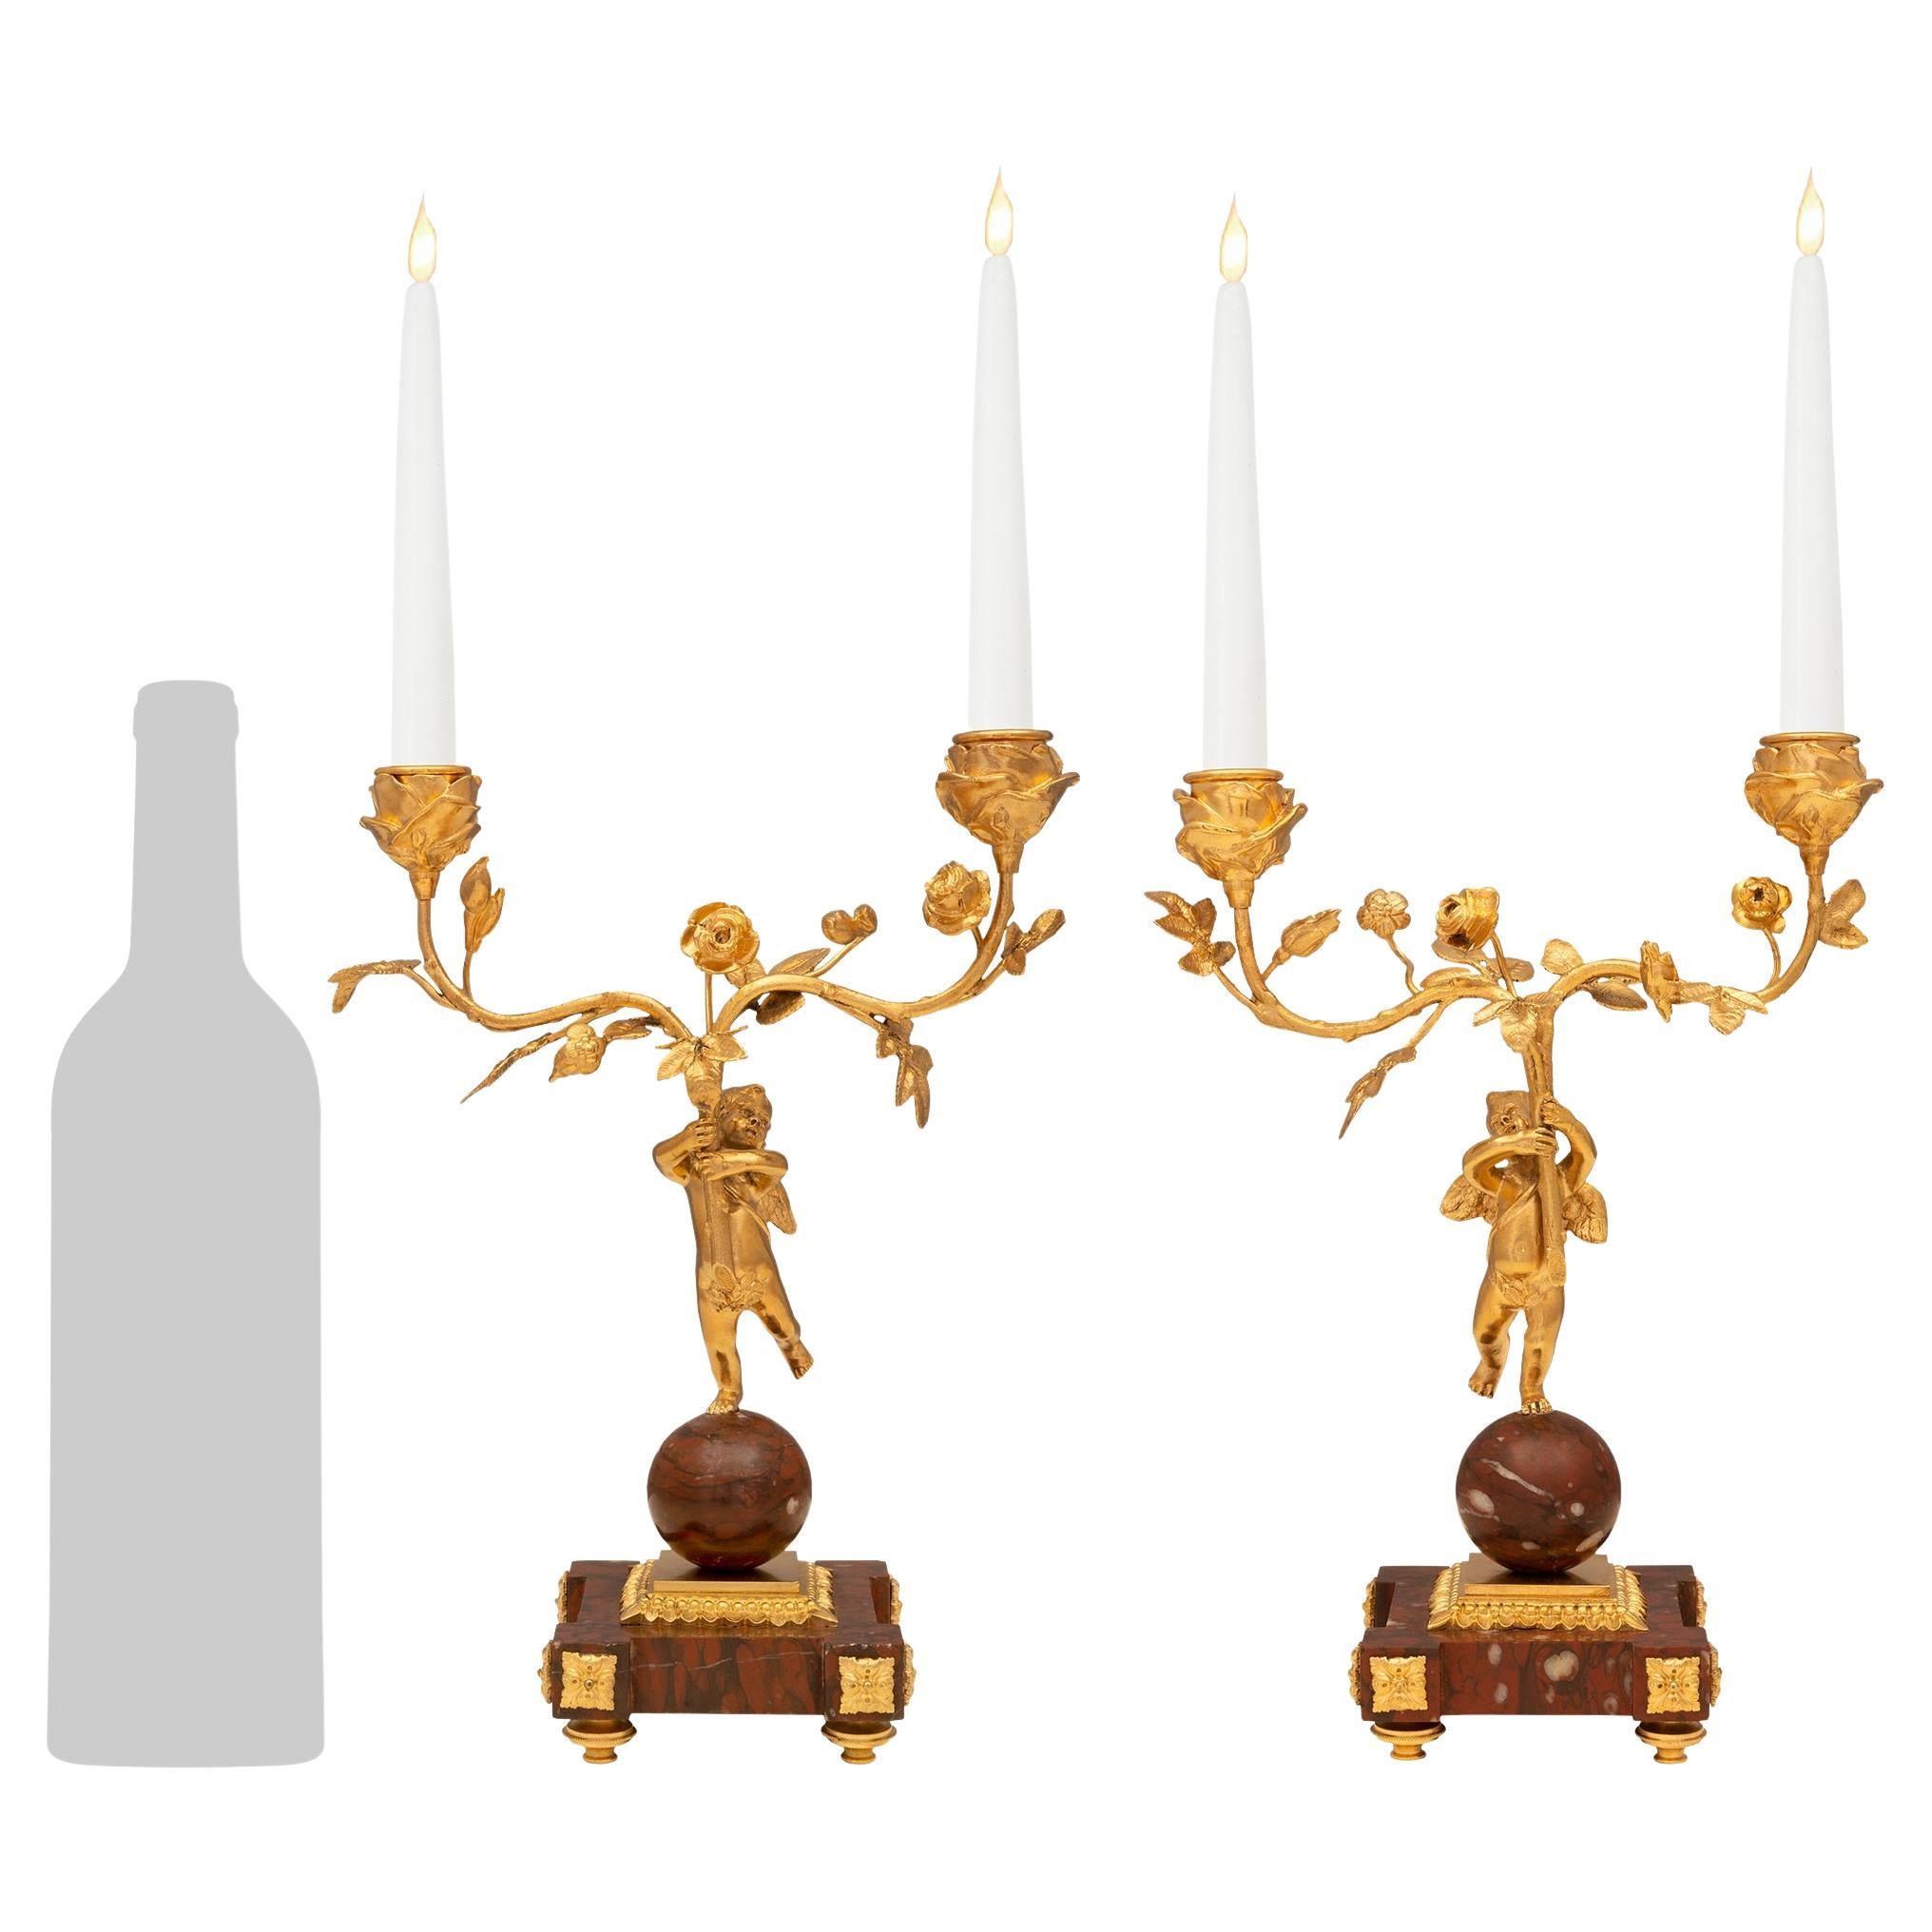 Pair of French 19th Century Elle Époque Period Ormolu and Marble Candelabras For Sale